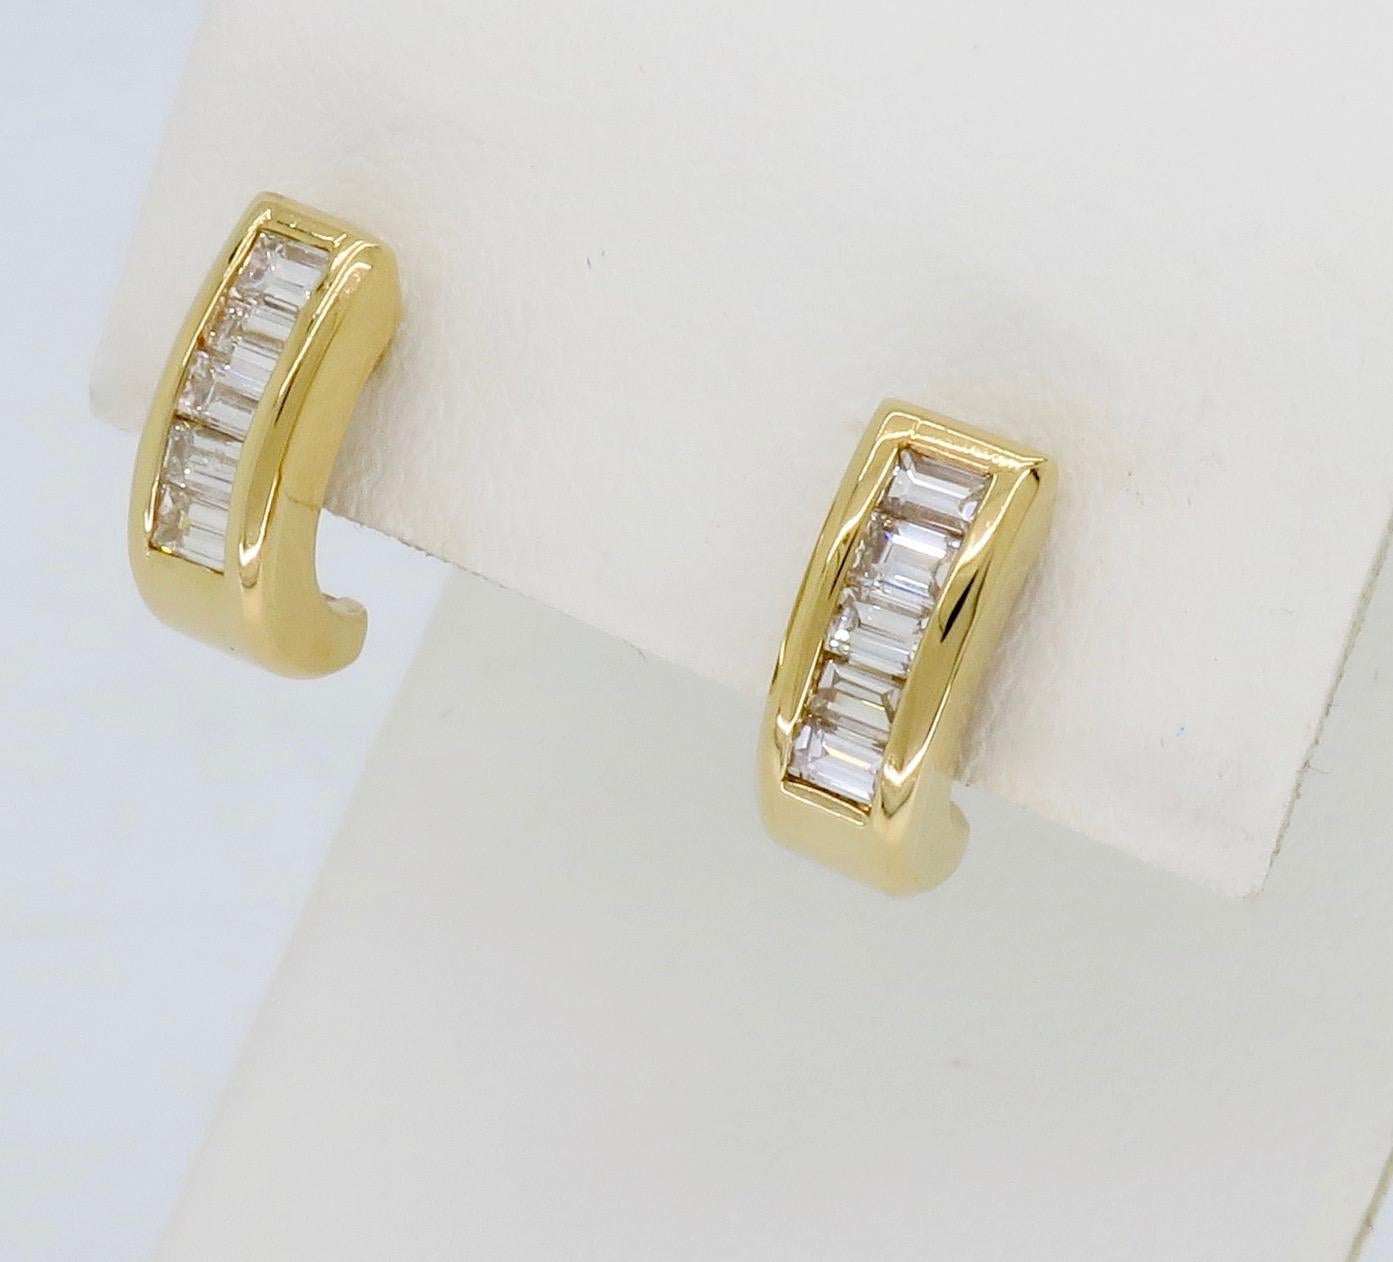 Stunning vertically set Baguette Cut Diamond earrings in 14k yellow gold. 

Diamond Carat Weight: Approximately .50CTW 
Diamond Cut:  Baguette Cut Diamonds
Color: Average G-I
Clarity: Average VS-SI
Metal: 14K Yellow Gold
Marked/Tested: Stamped